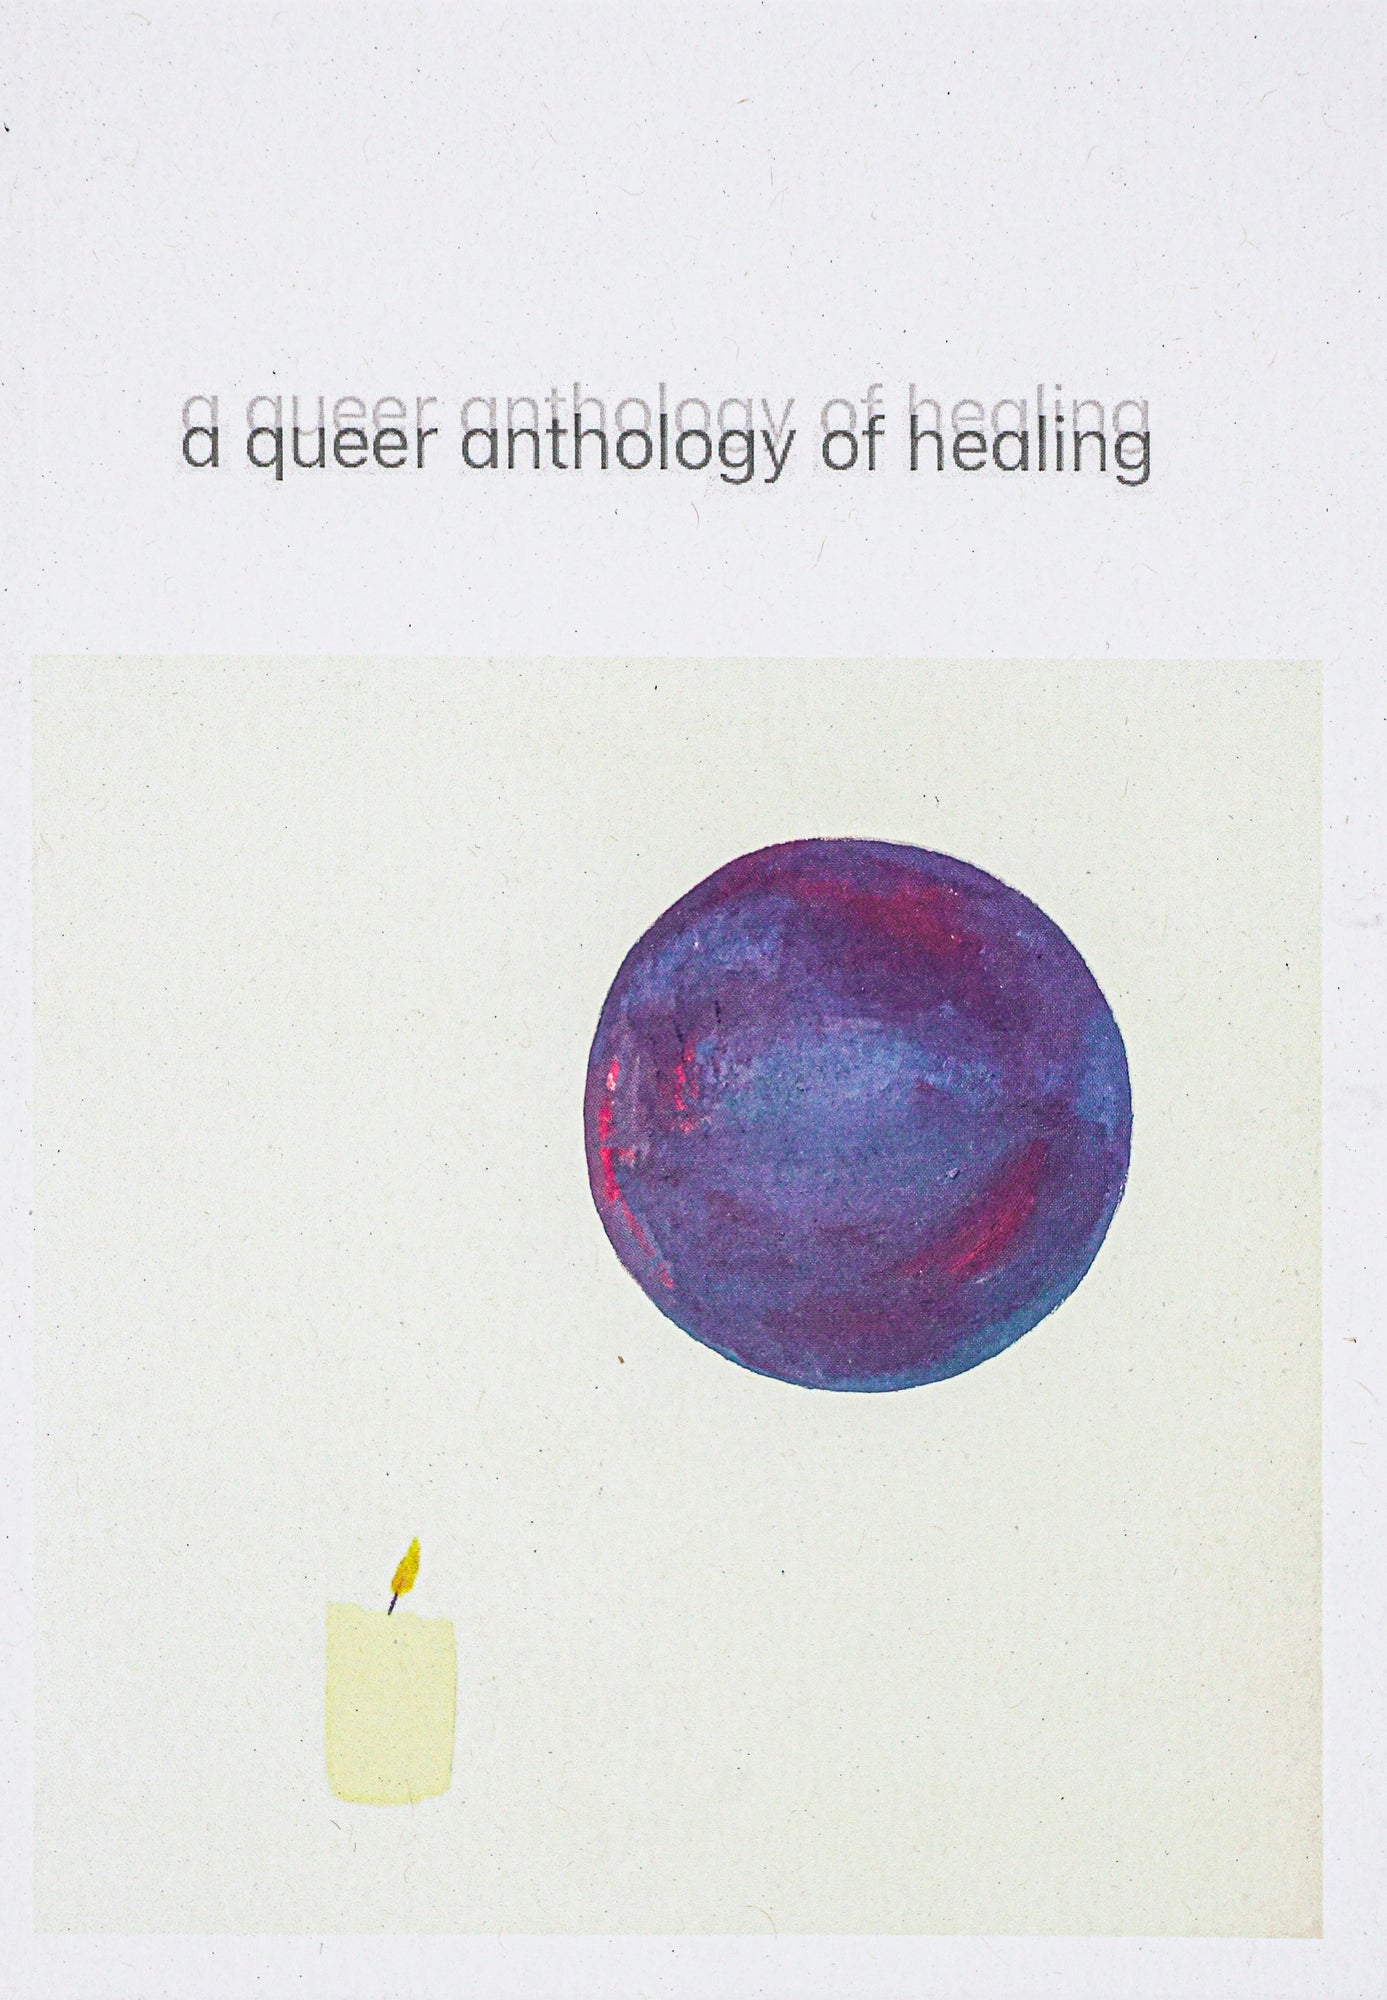 Book cover with a painting of a candle below the dark, purple and red moon, above which the title, "a queer anthology of healing" is written.